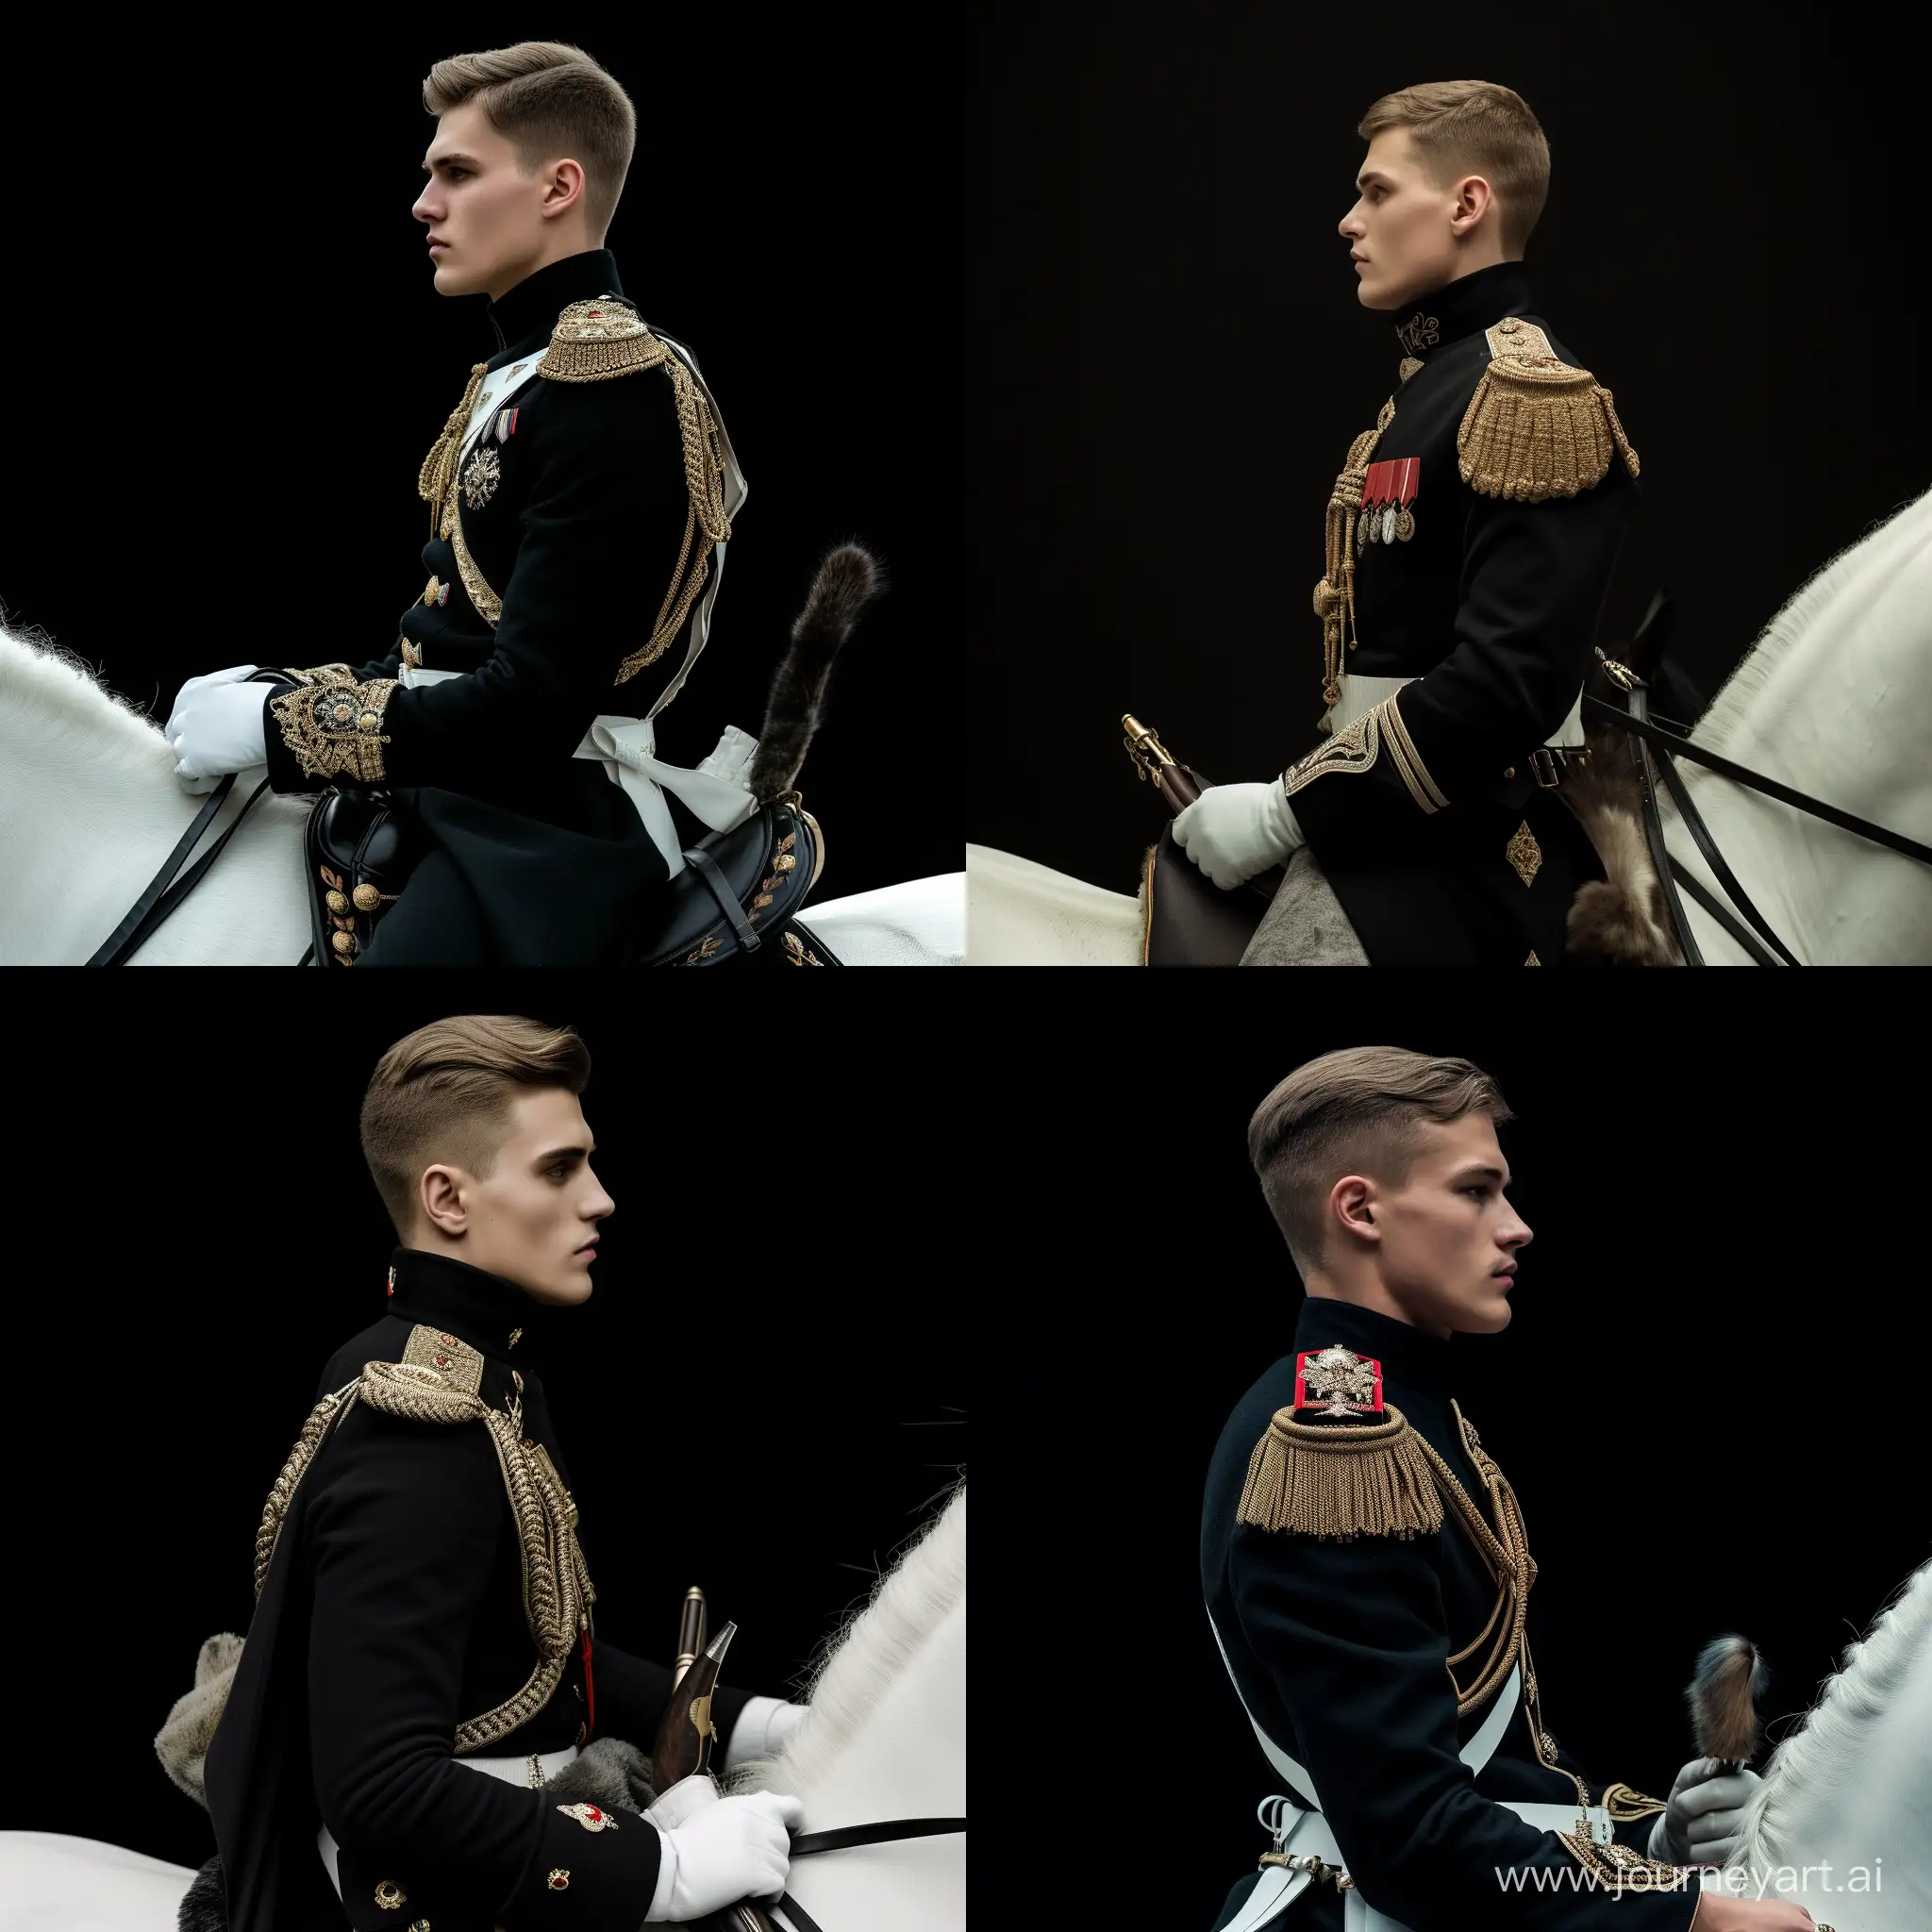 A sophisticated, realistic 4k cinematic photo,young adult, not a mature 17 years old. European appearance with classical medium length haircut, side back hairstlye. He's wearing the ceremonial uniform of Nicholas II, black costume with the. In his right hand is a sable. He is sitting on a white horse, The background is a solid black color. Cinematographic image. The backdrop is a black colour. Side view